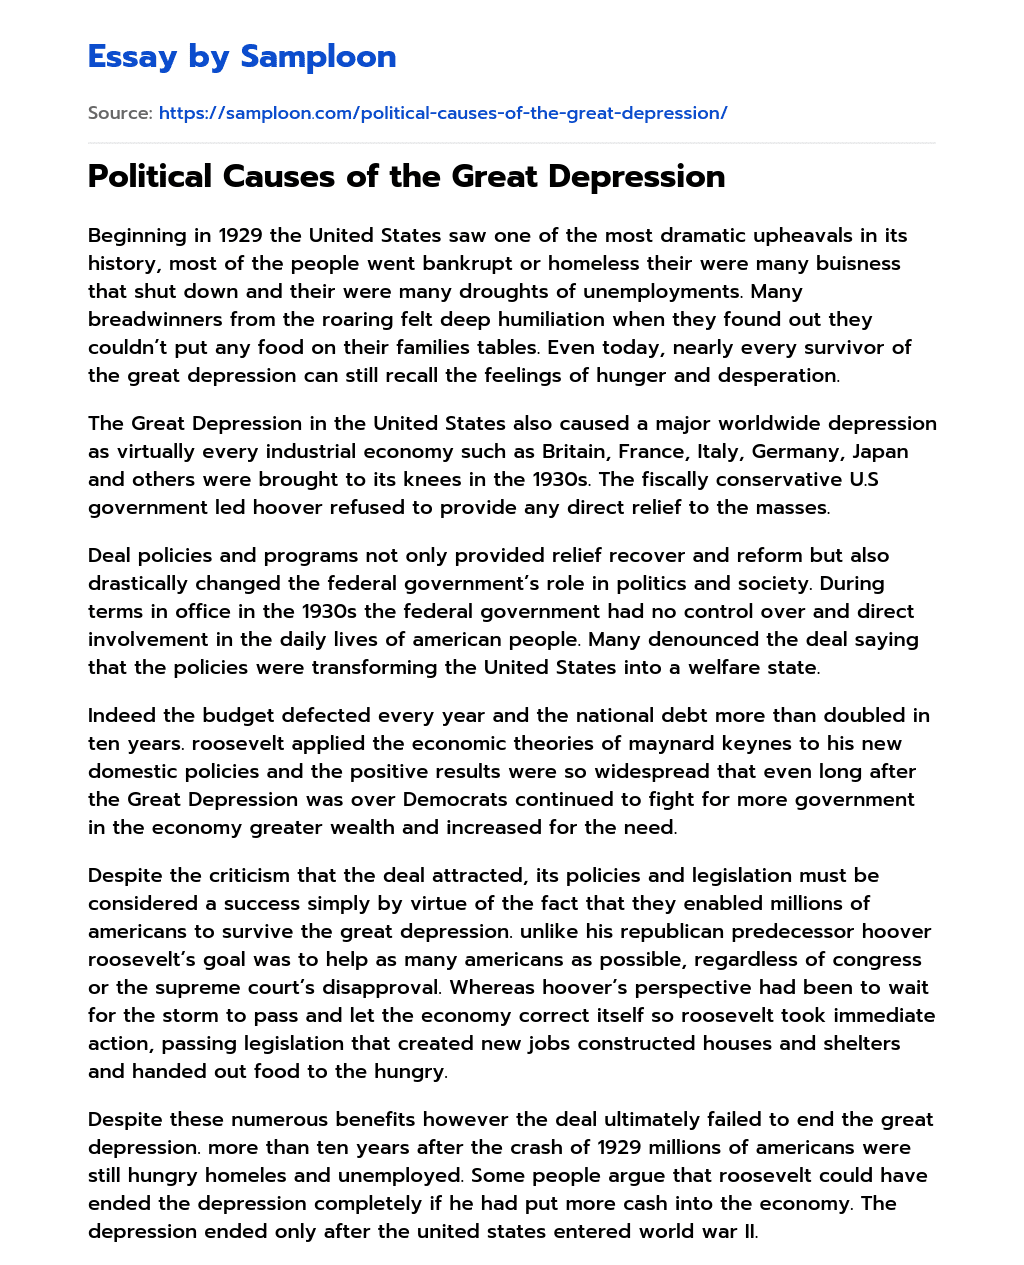 Political Causes of the Great Depression essay